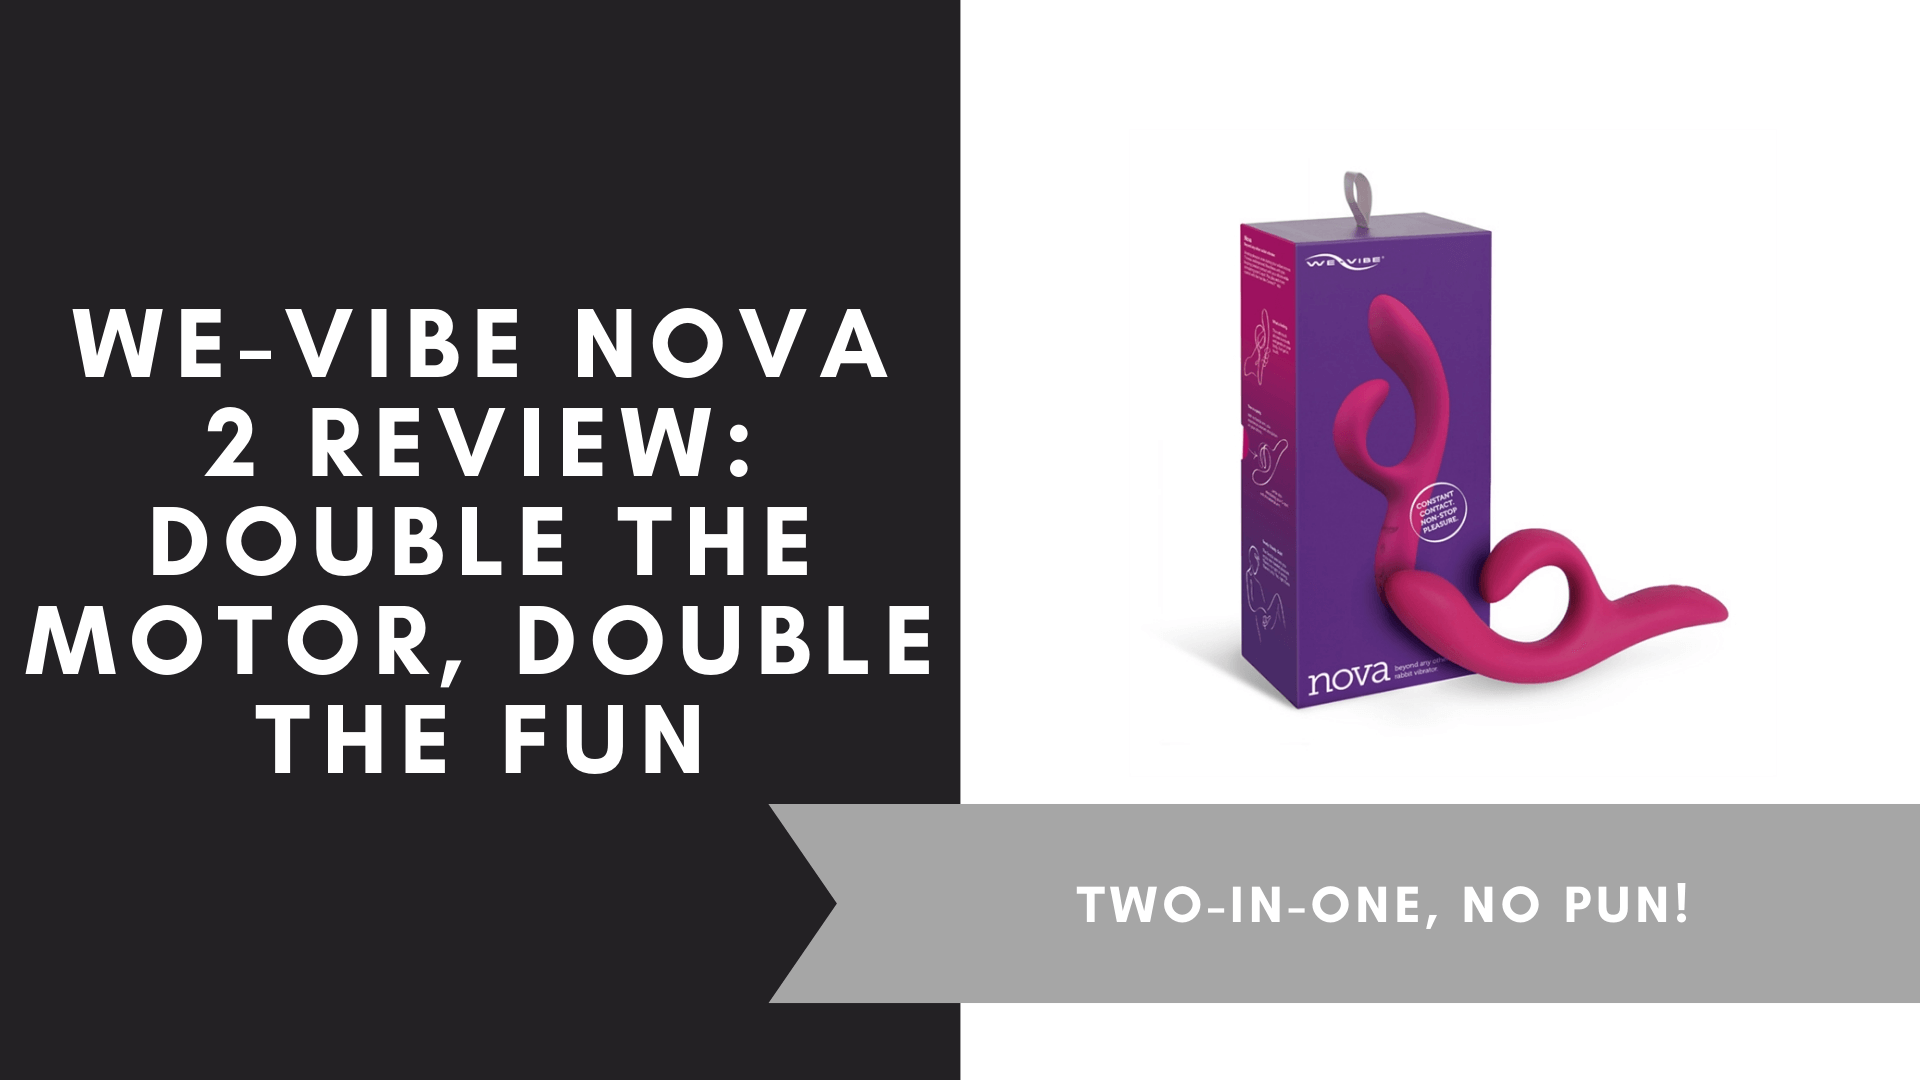 We-Vibe Nova 2 Review Double to Motor, Double the Fun, September 2021